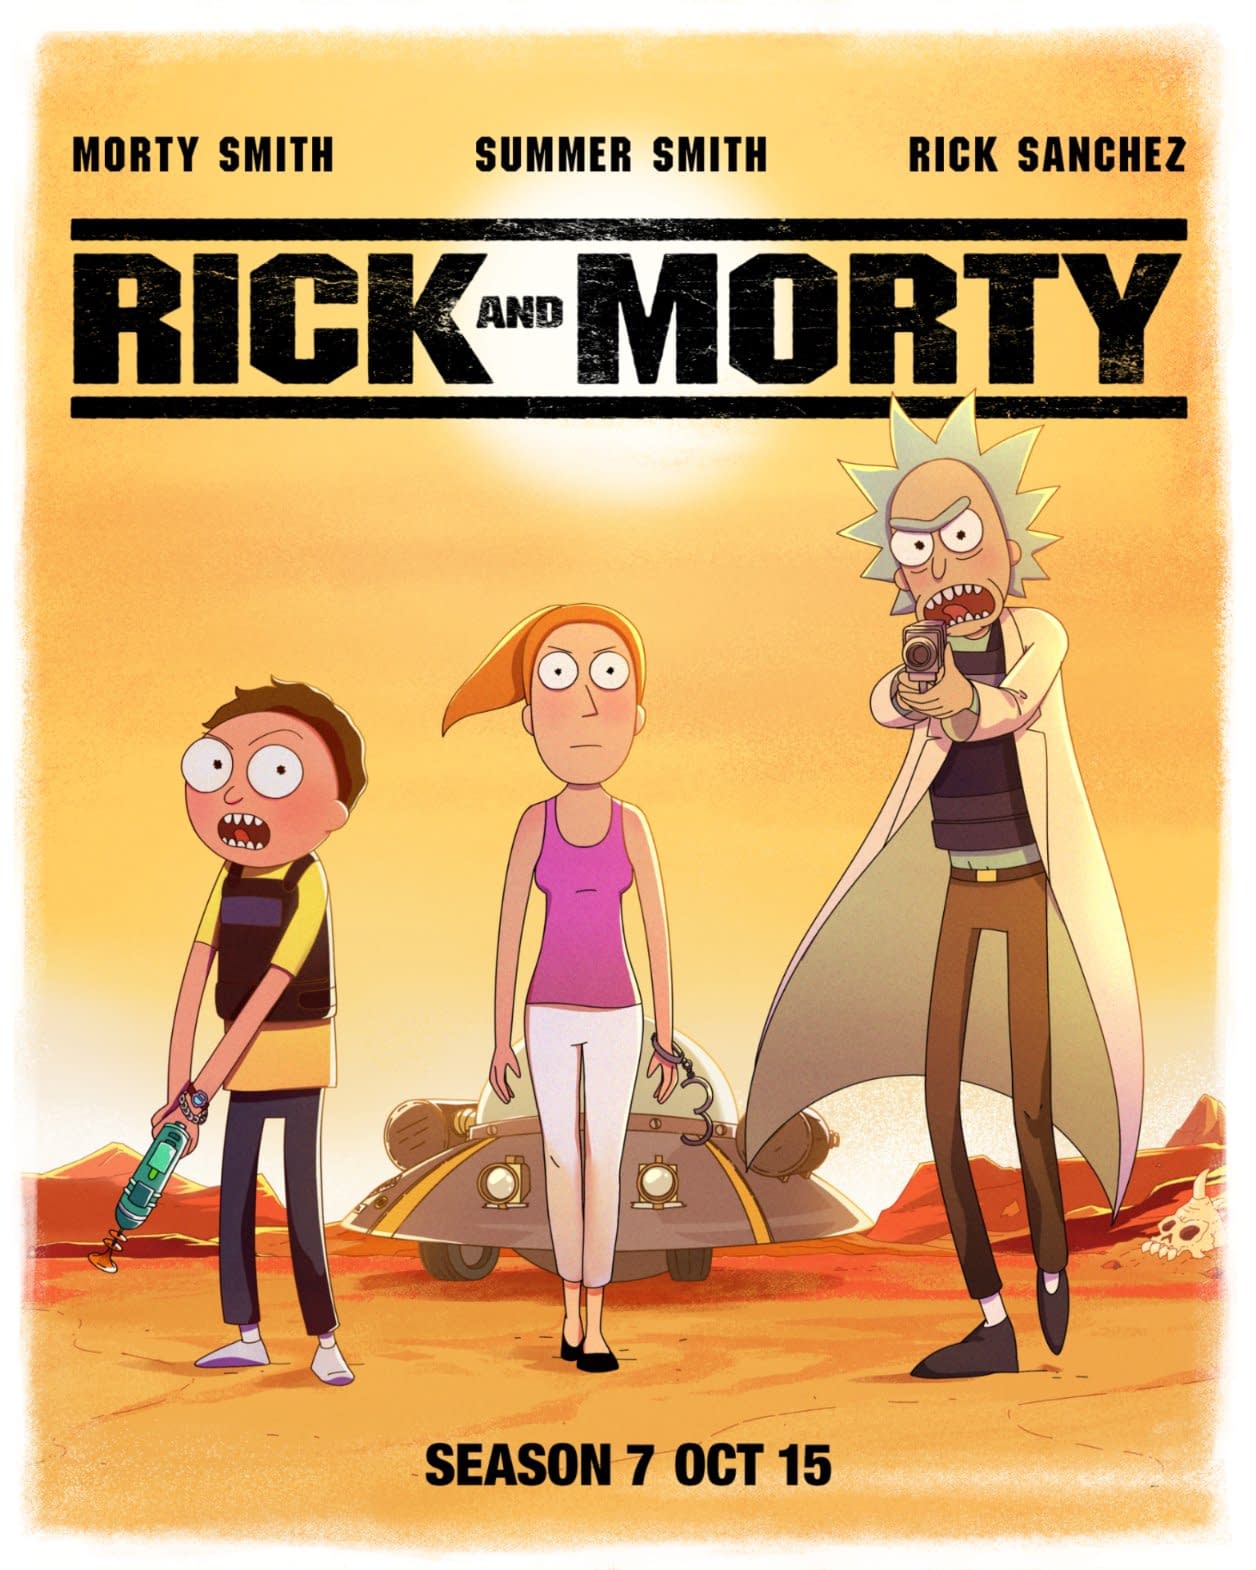 Rick And Morty Are Ride Or Die Season 7 Key Art Sets October Return